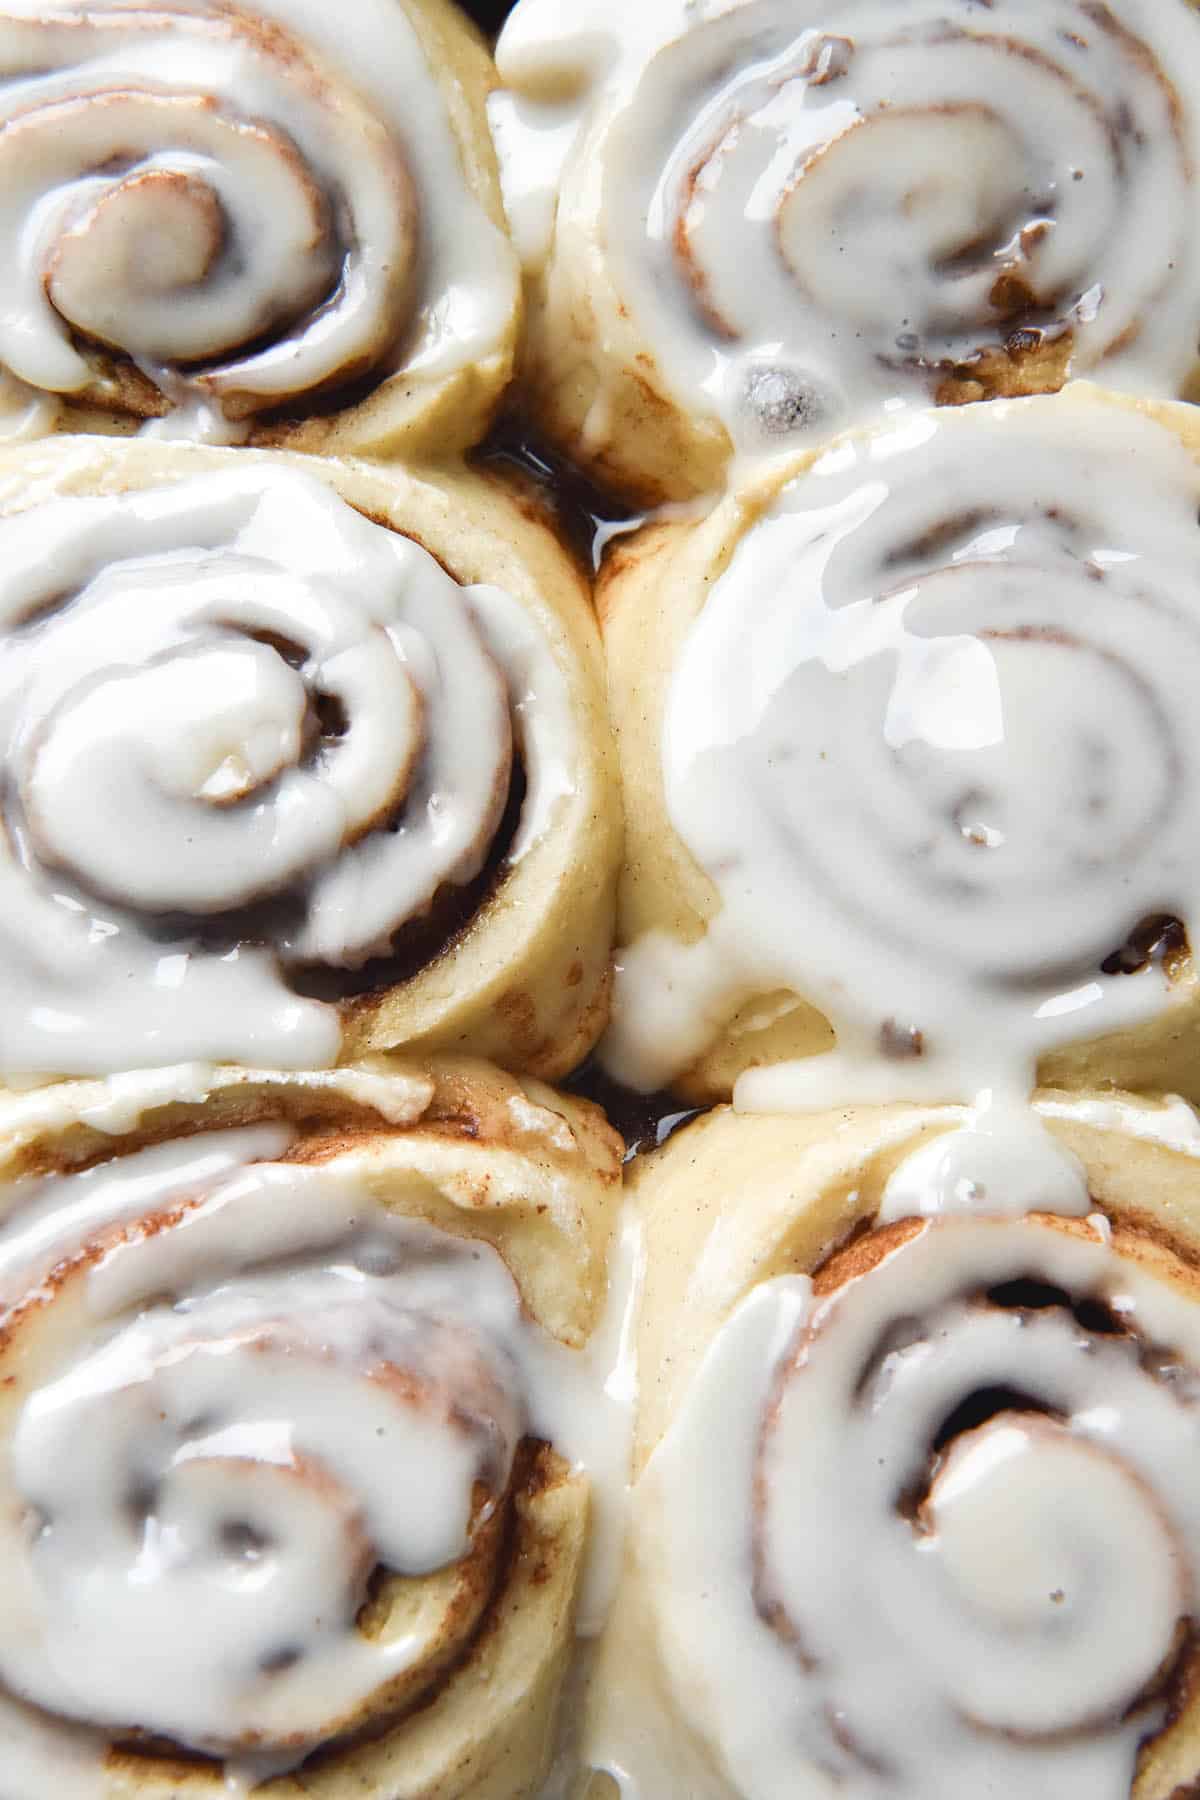 An aerial close up image of a tray of gluten free cinnamon rolls topped with a white glaze that oozes off the rolls